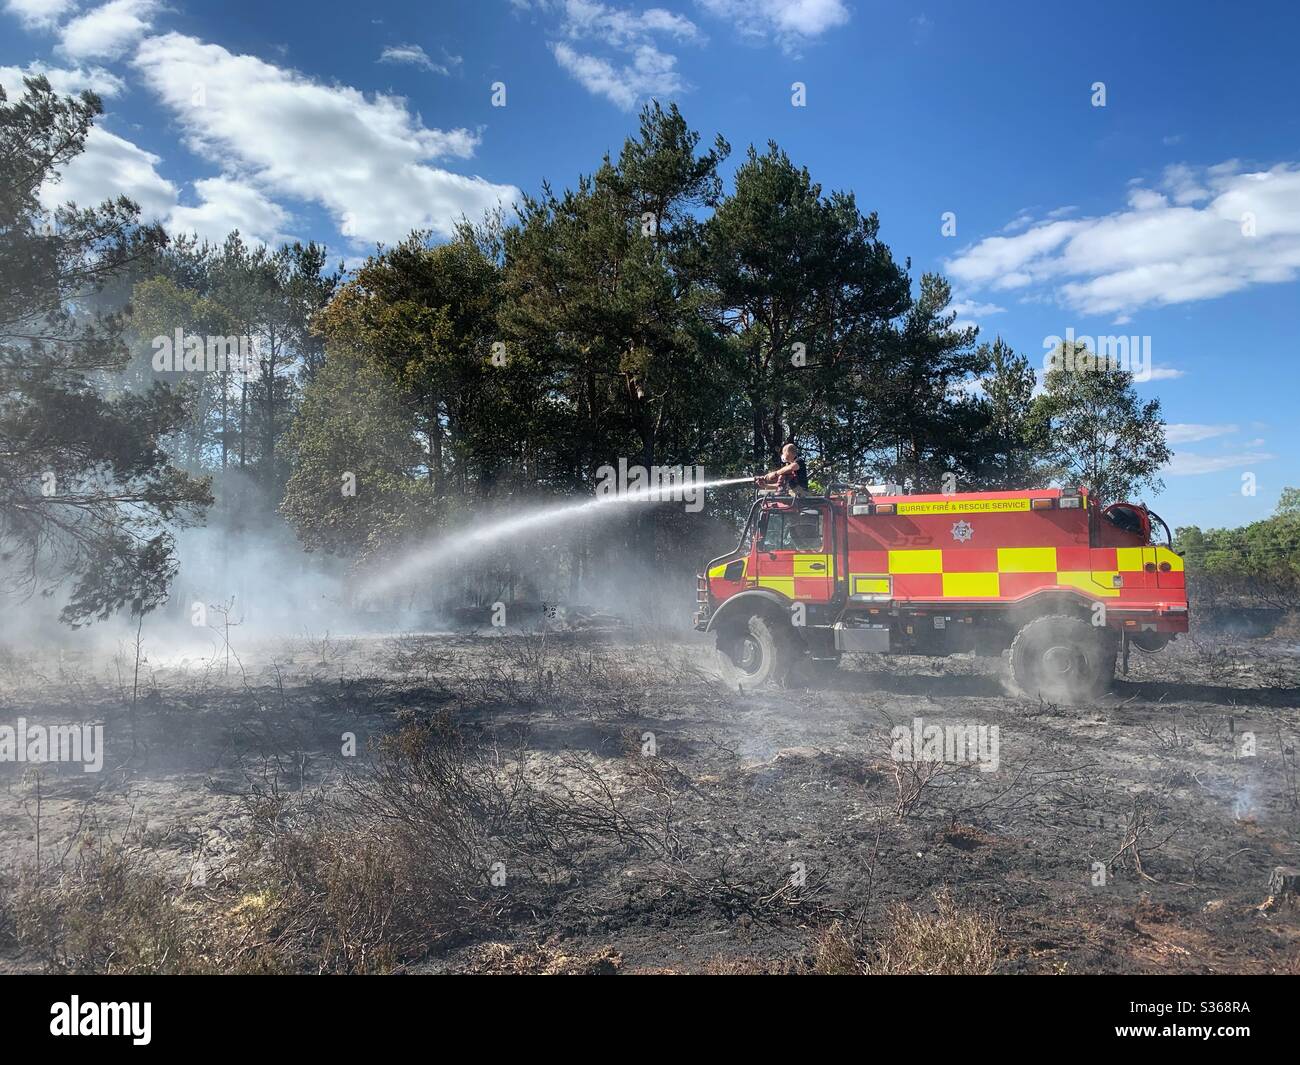 An off-road firefighting vehicle sprays water during a wildfire on heathland in Hampshire. Stock Photo